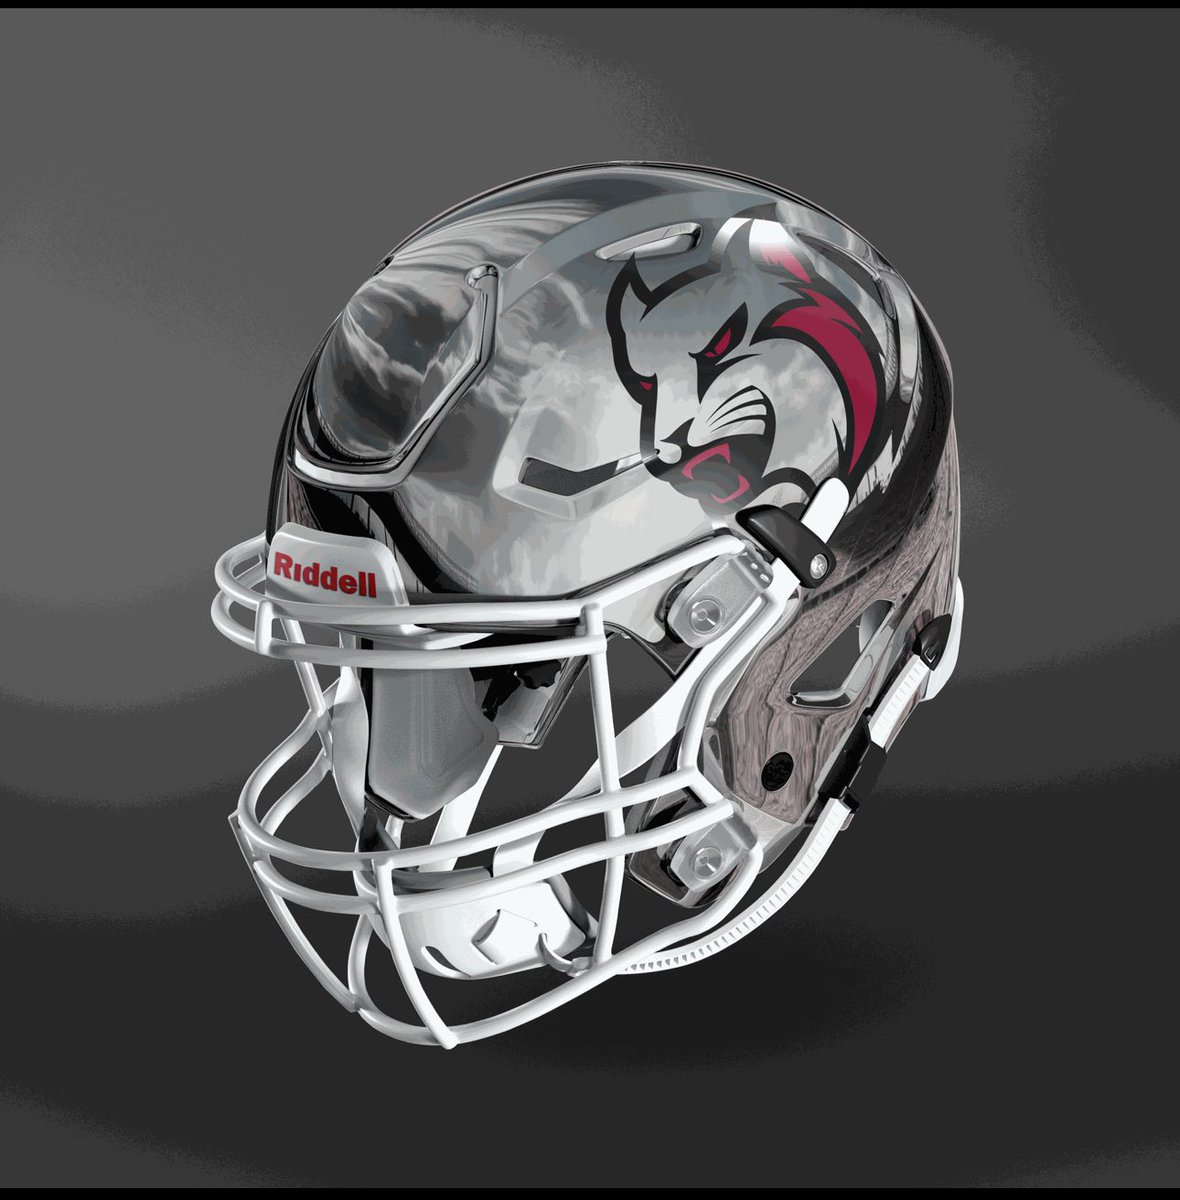 2nd helmet color coming in 2024!!! Always looking to better our SWAG!!! #HypeOnTheHill